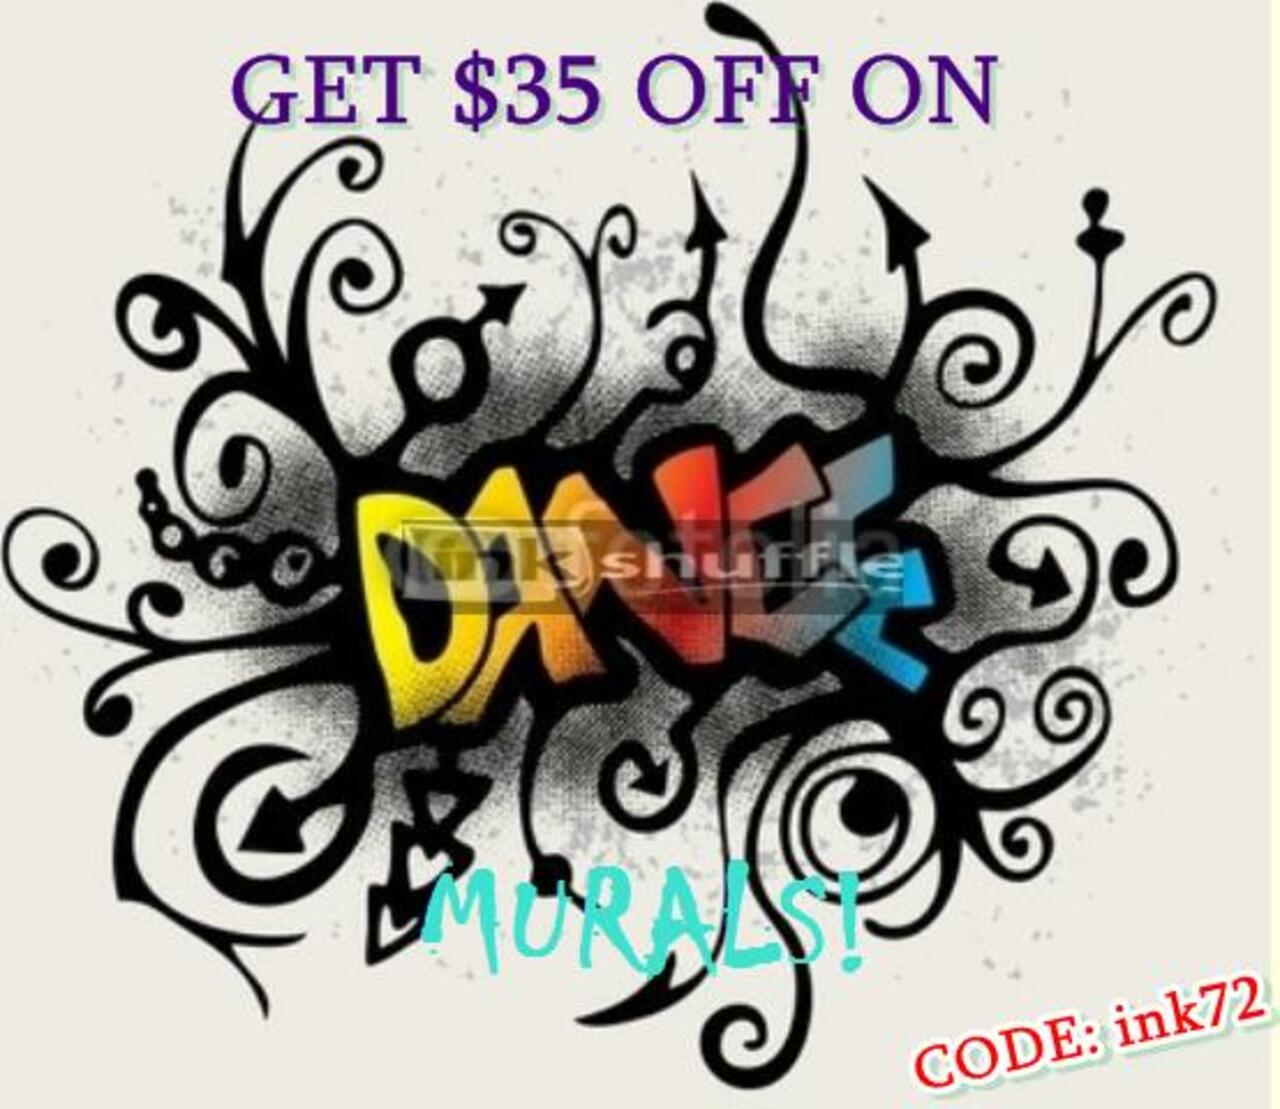 Is dancing your passion? Grab this dance-themed #graffiti InkShuffle #mural at $35 less!
http://bit.ly/1Dg5W7Q http://t.co/zYk41AVAtM